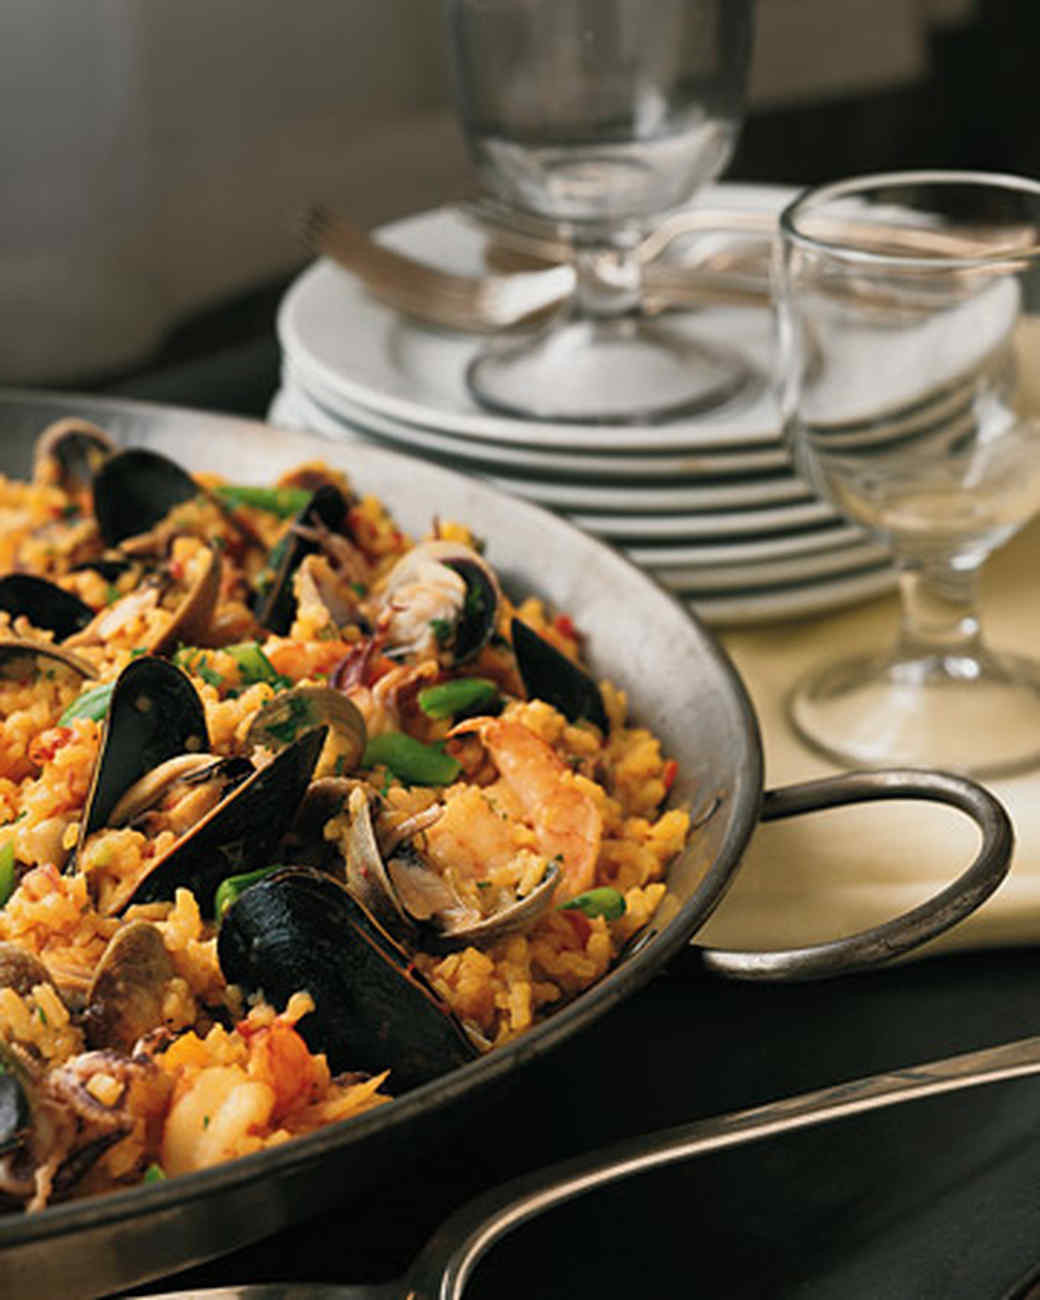 Seafood Dinner Party Ideas
 Seafood Recipes for Entertaining